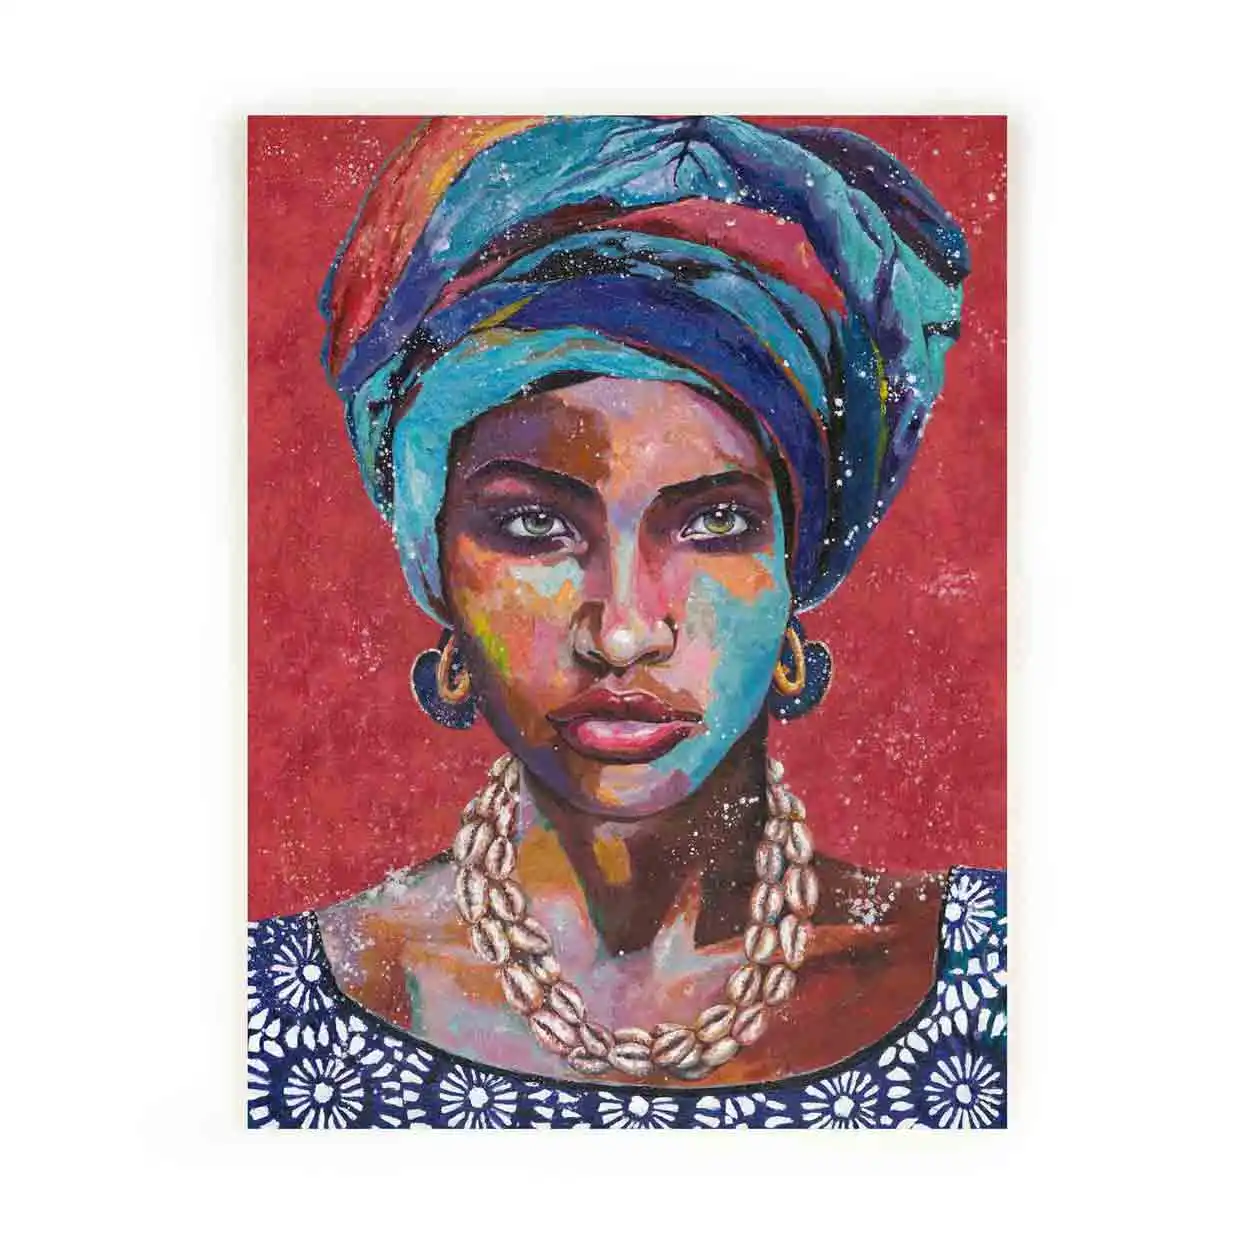 Hot Sale Modern Art African Lady Canvas Print Painting Black Woman Portrait Painting Room Decorative Wall Picture Fine Art